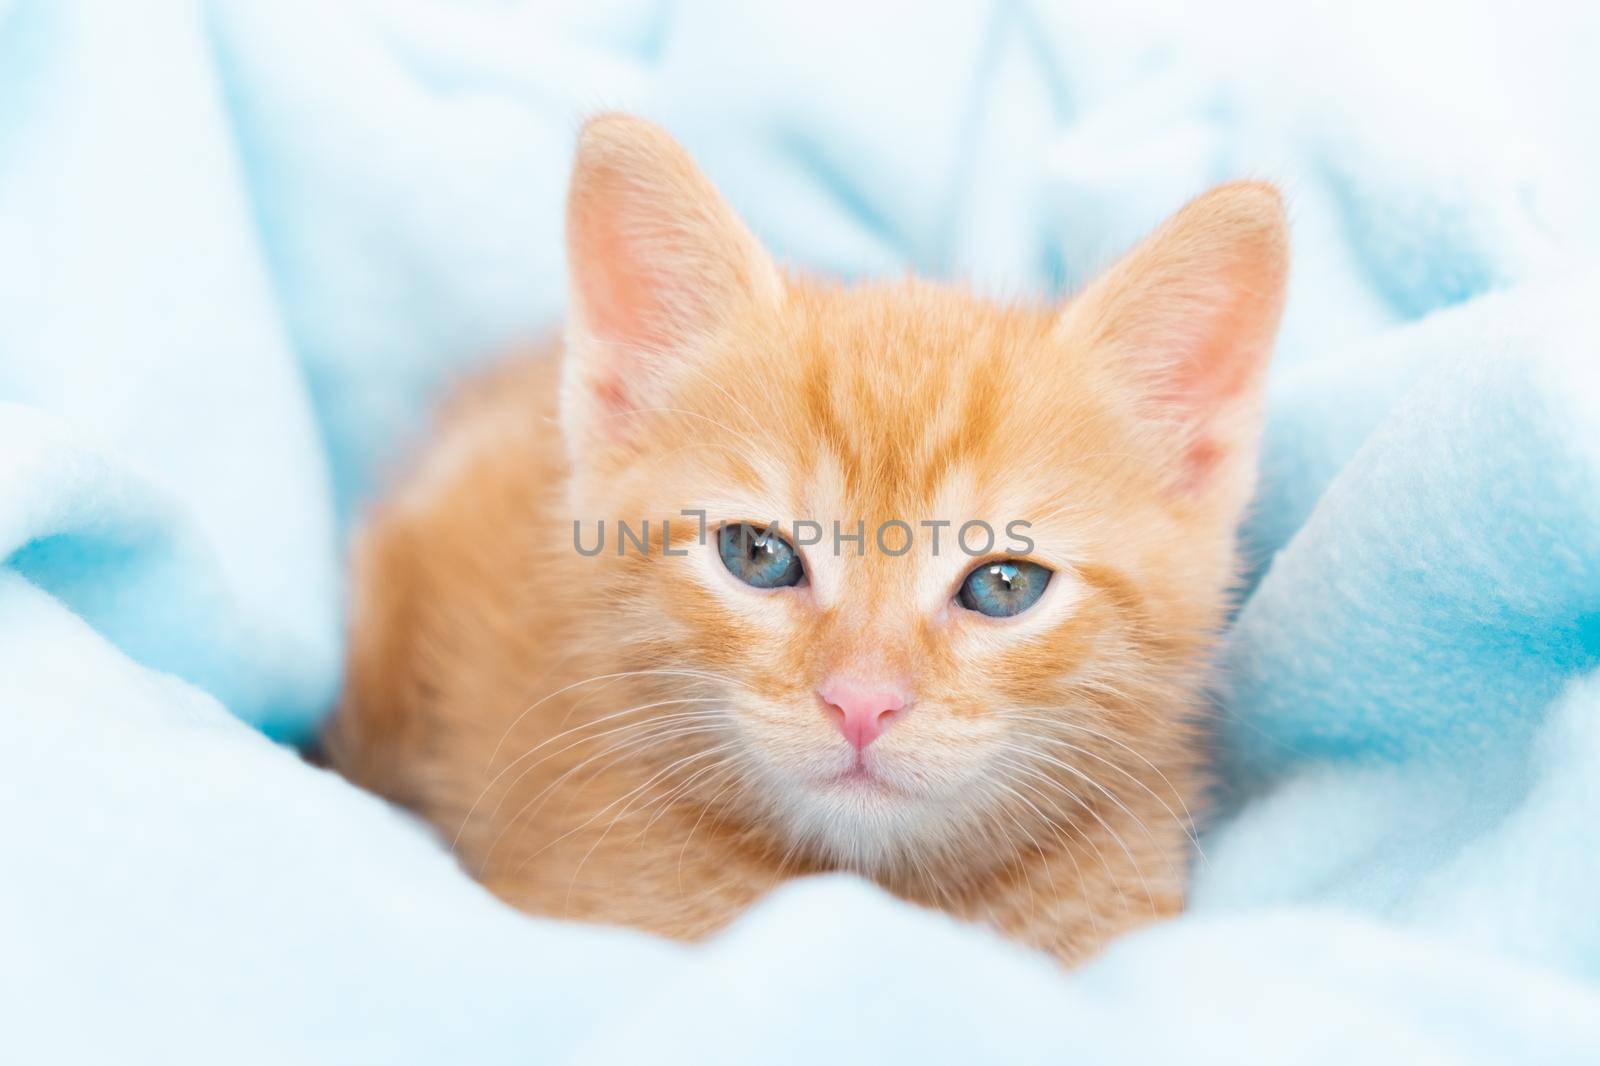 A small red tabby kitten lies comfortably in a blue blanket, looks at the camera. Concept of taking care of pets, winter and spring holidays, Easter, Christmas, New Year, Valentines Day